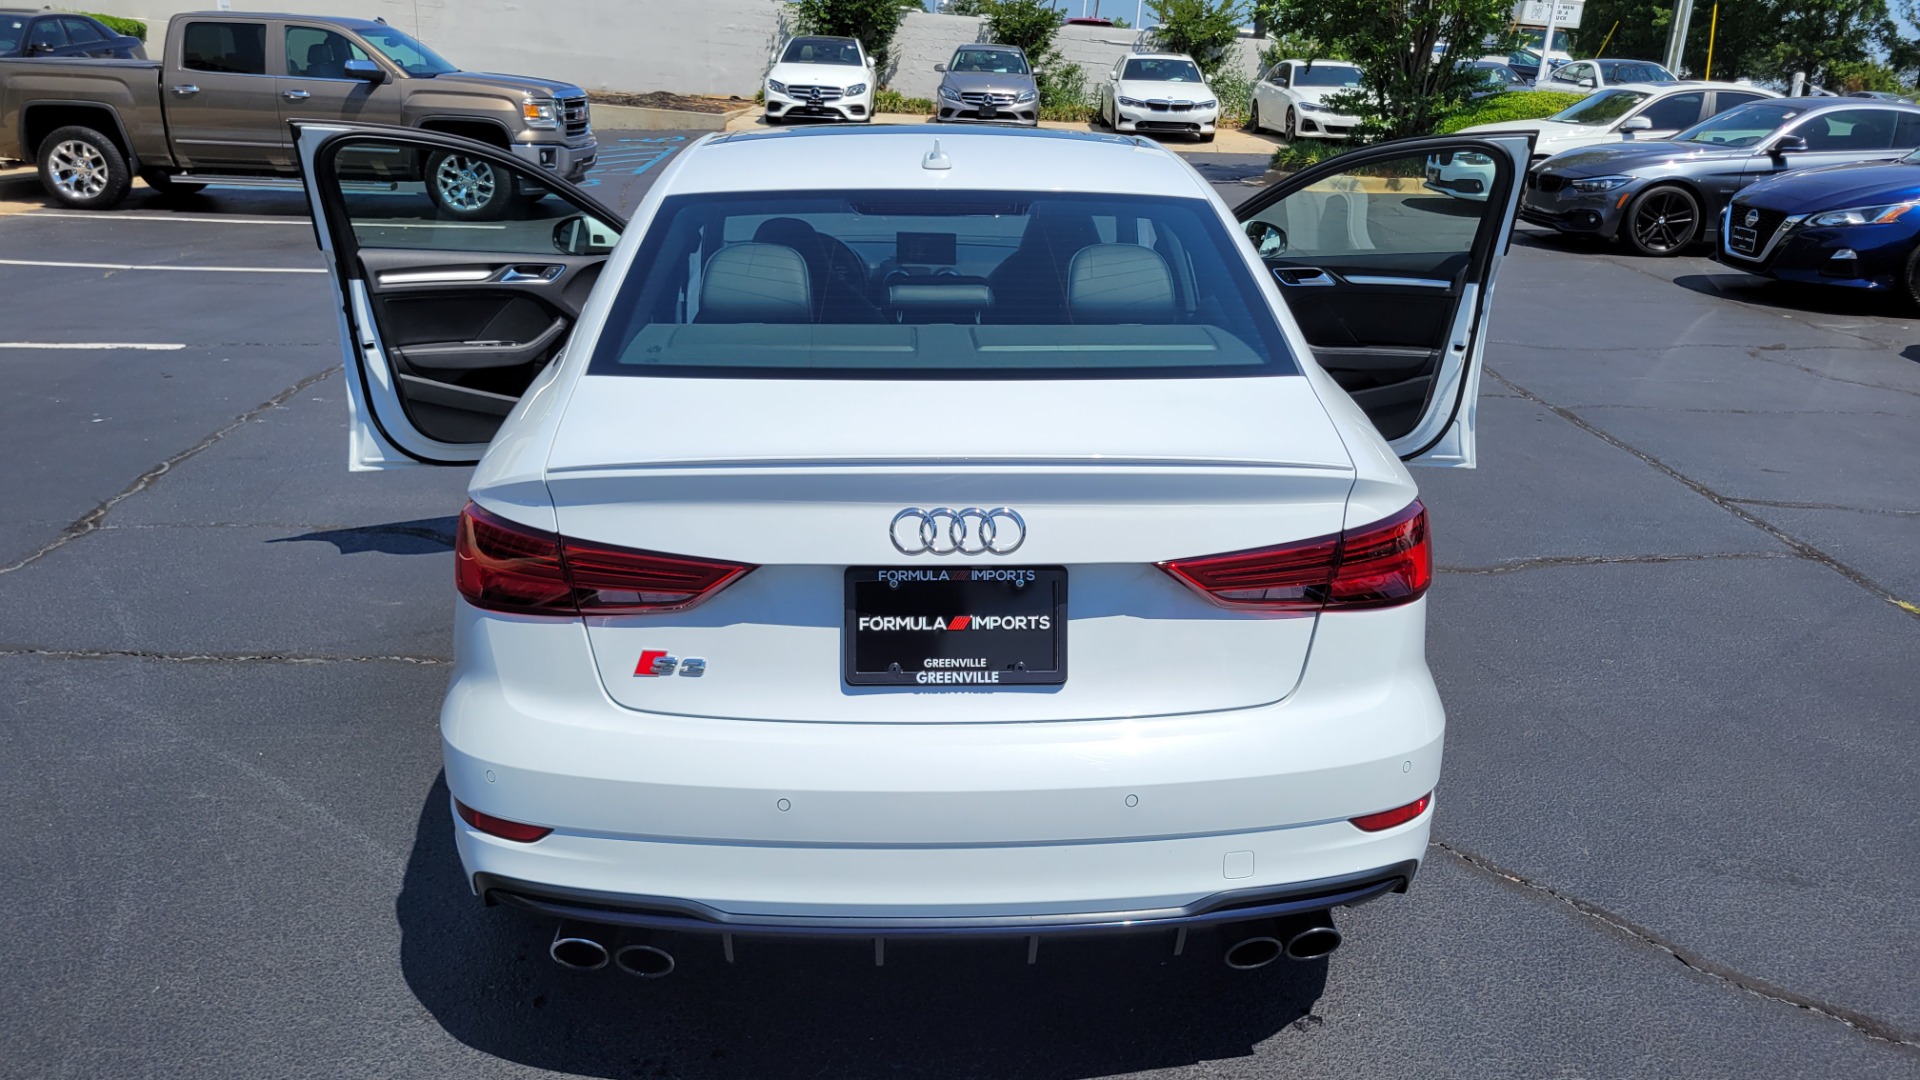 Used 2018 Audi S3 PREMIUM PLUS TECHNOLOGY / NAV / S-SPORT / BLACK OPTIC / B&O SND / REARVIEW for sale $39,995 at Formula Imports in Charlotte NC 28227 19